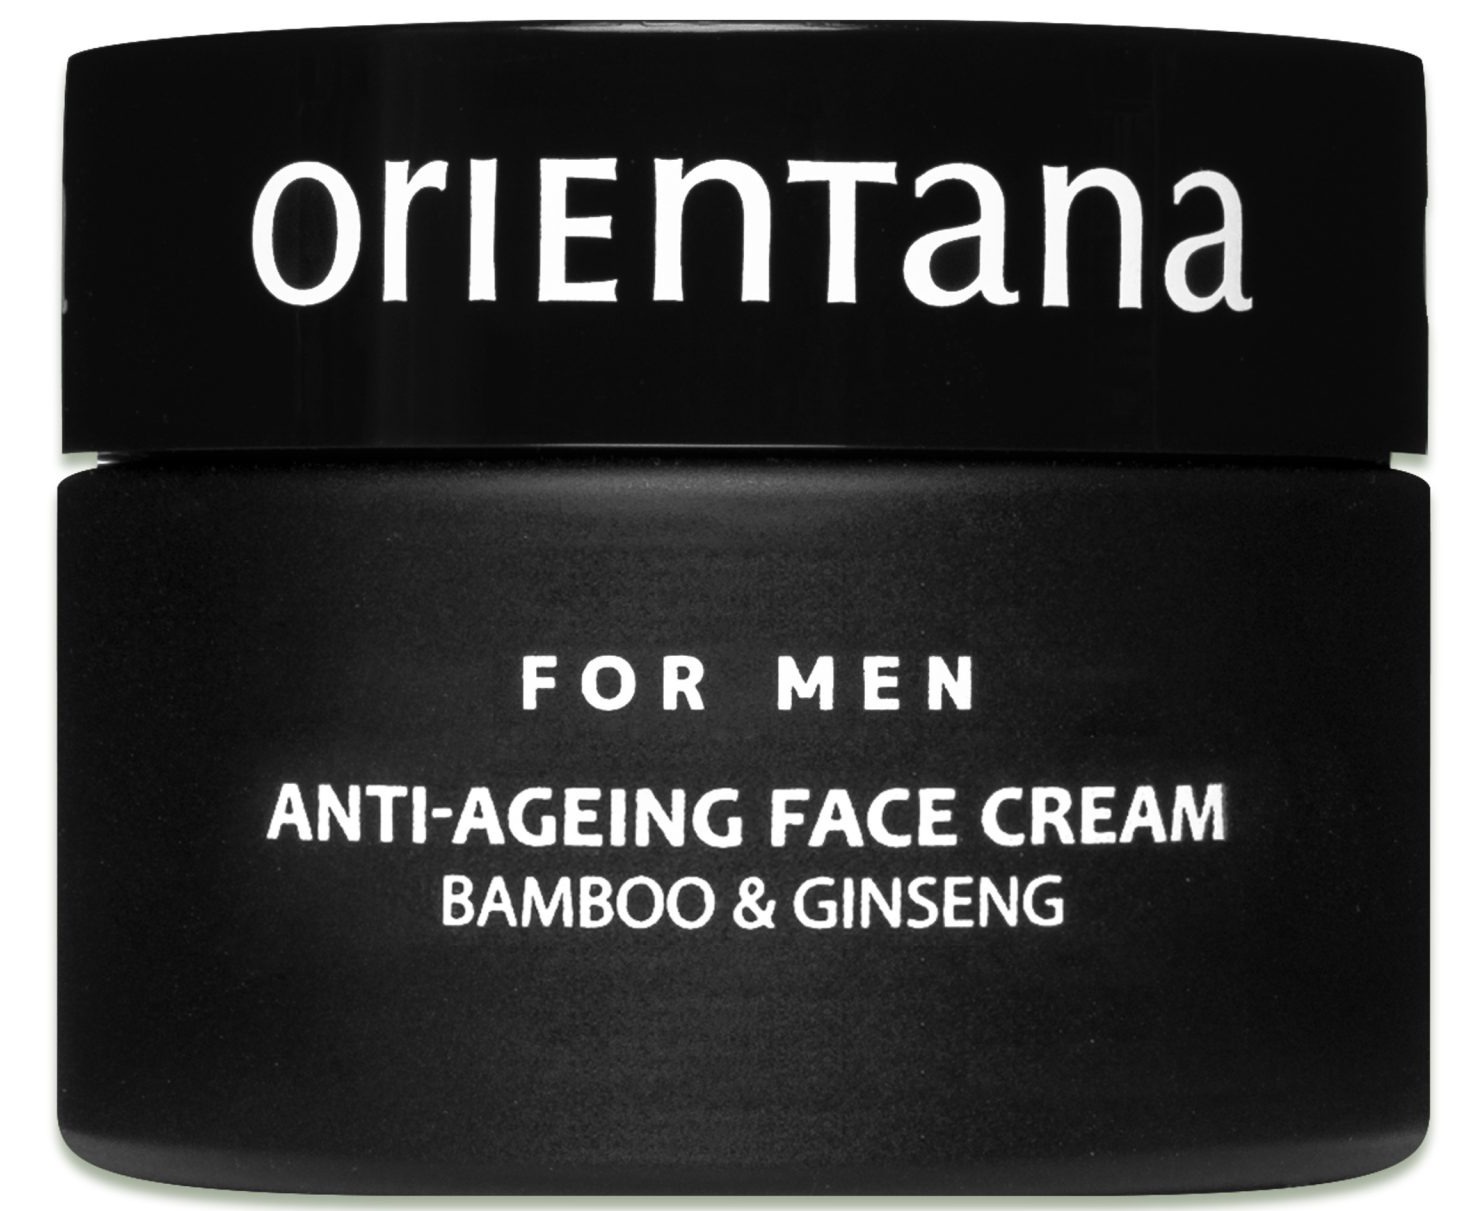 ORIENTANA Bamboo And Ginseng Anti-ageing Face Cream